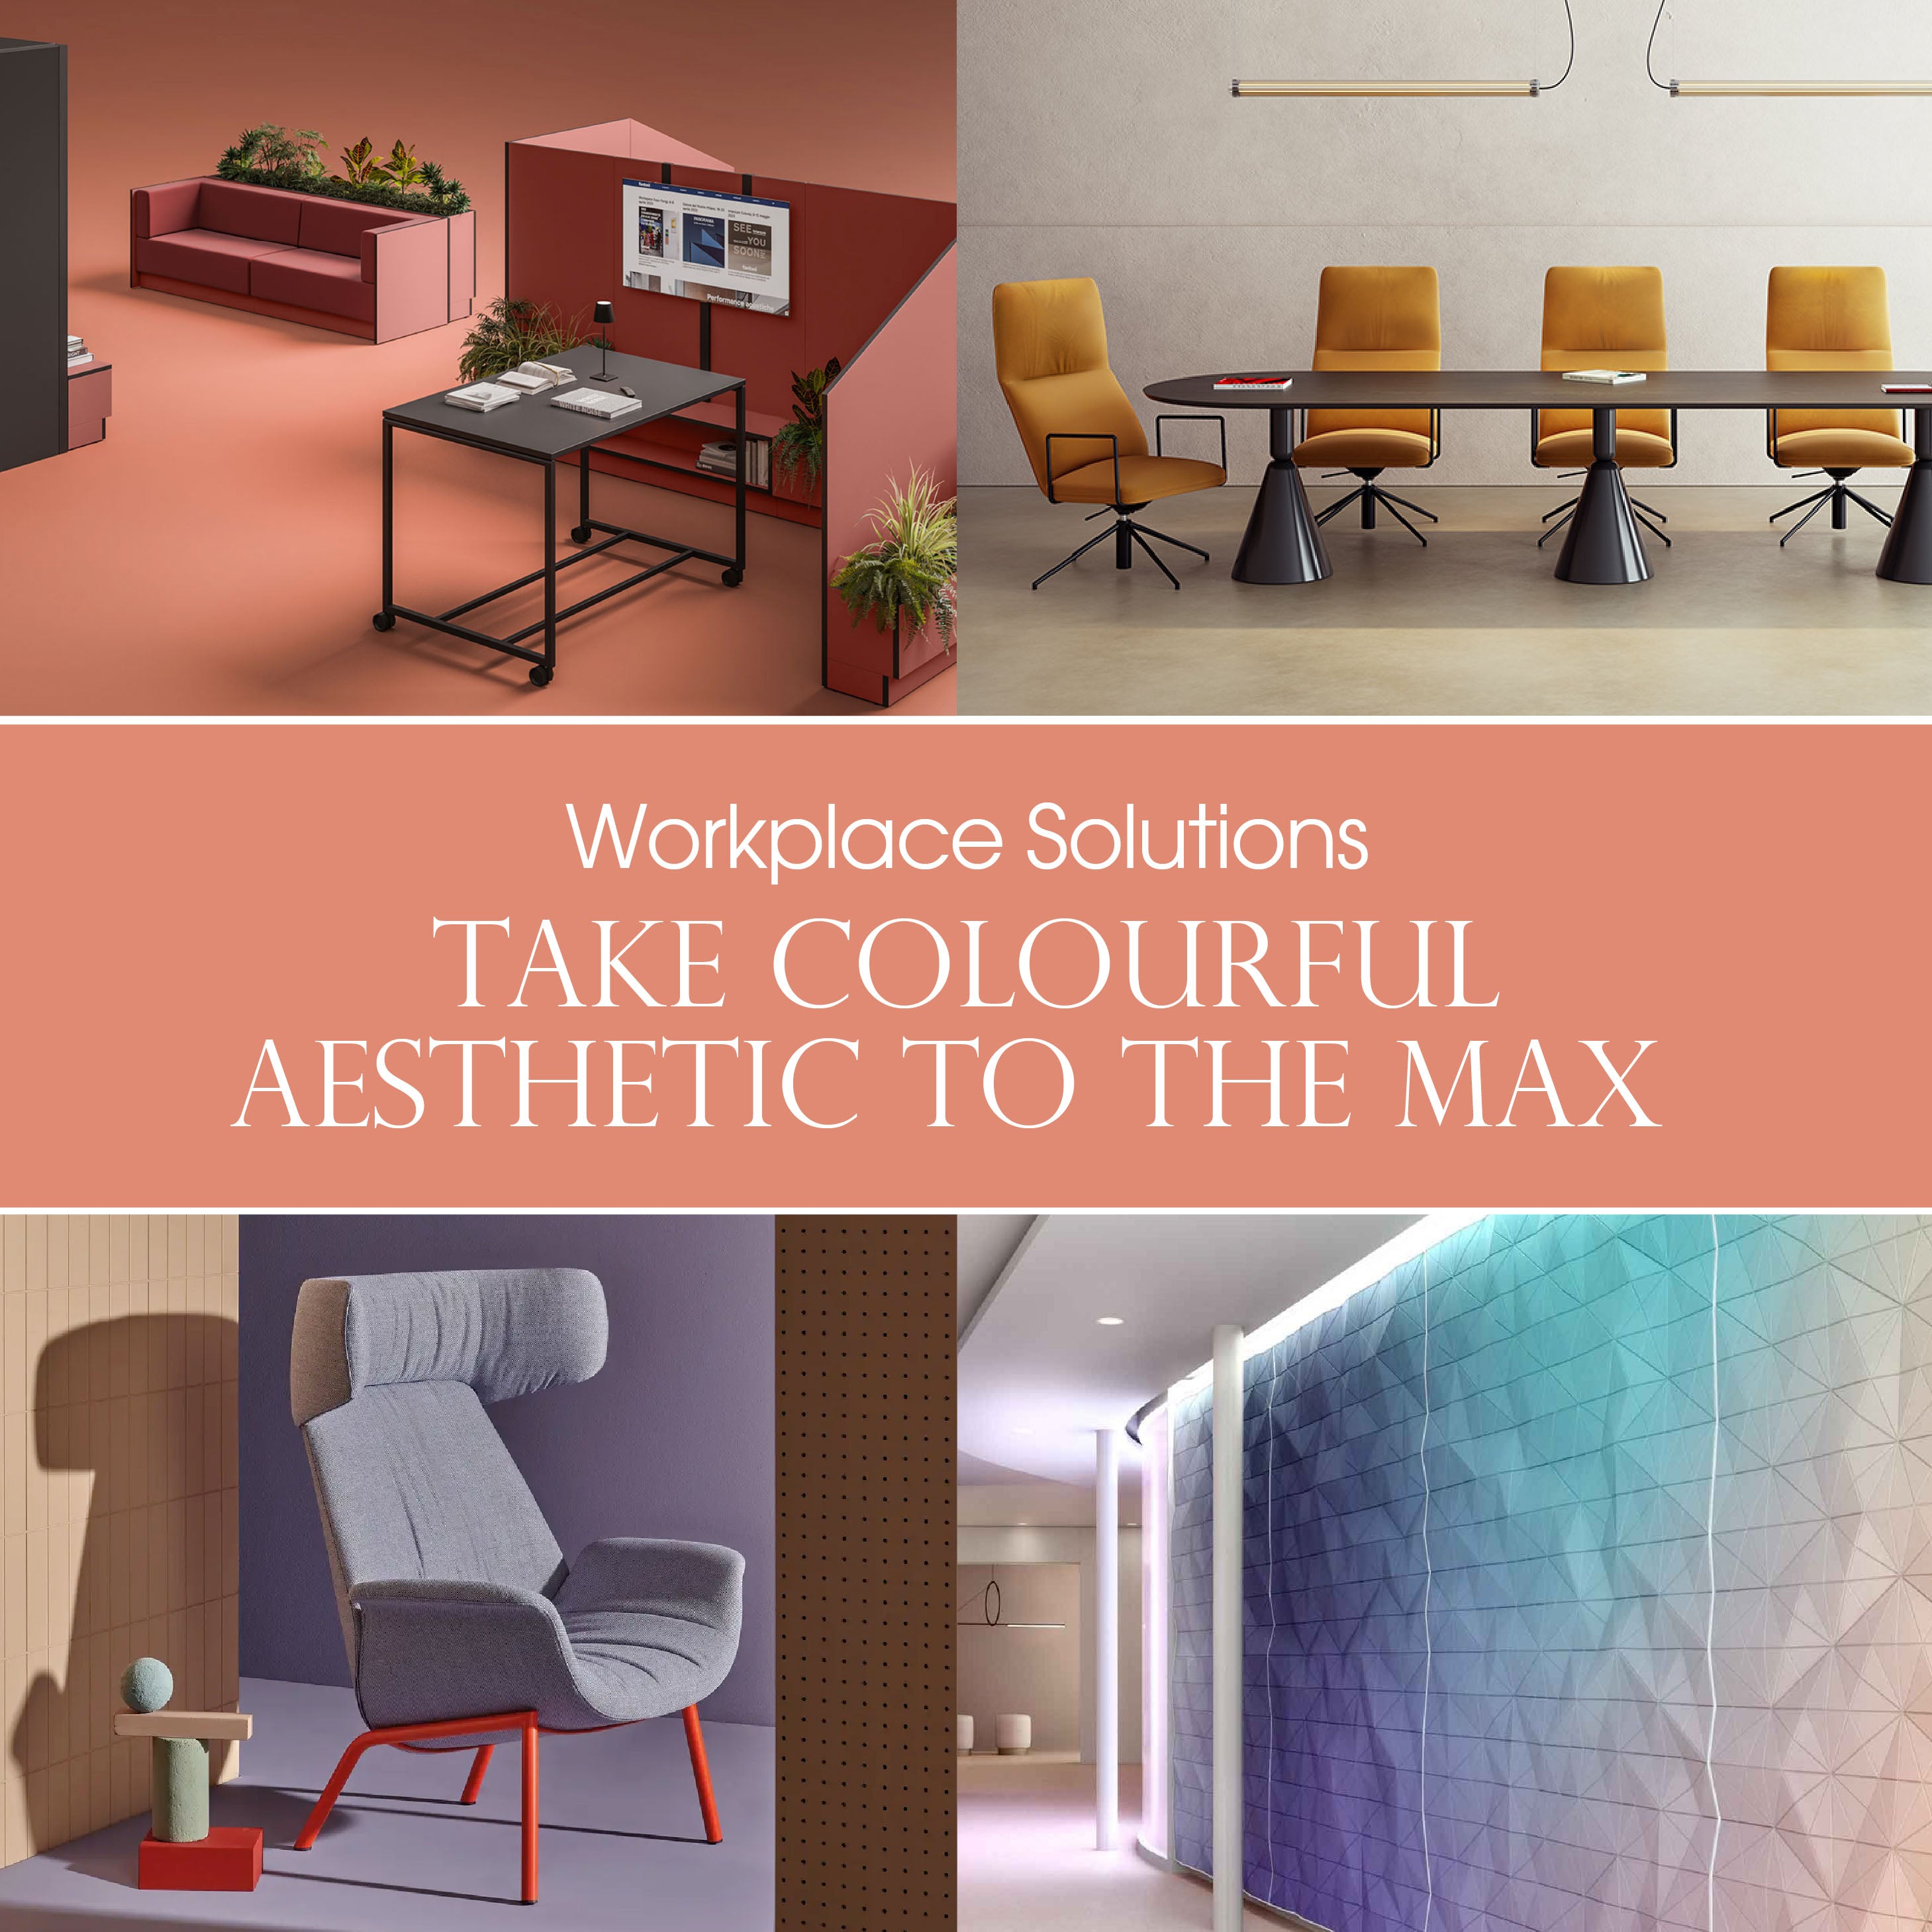 COLOURLIVING | WORKPLACE SOLUTIONS | TAKE COLOURLFUL AESTHETIC TO THE MAX